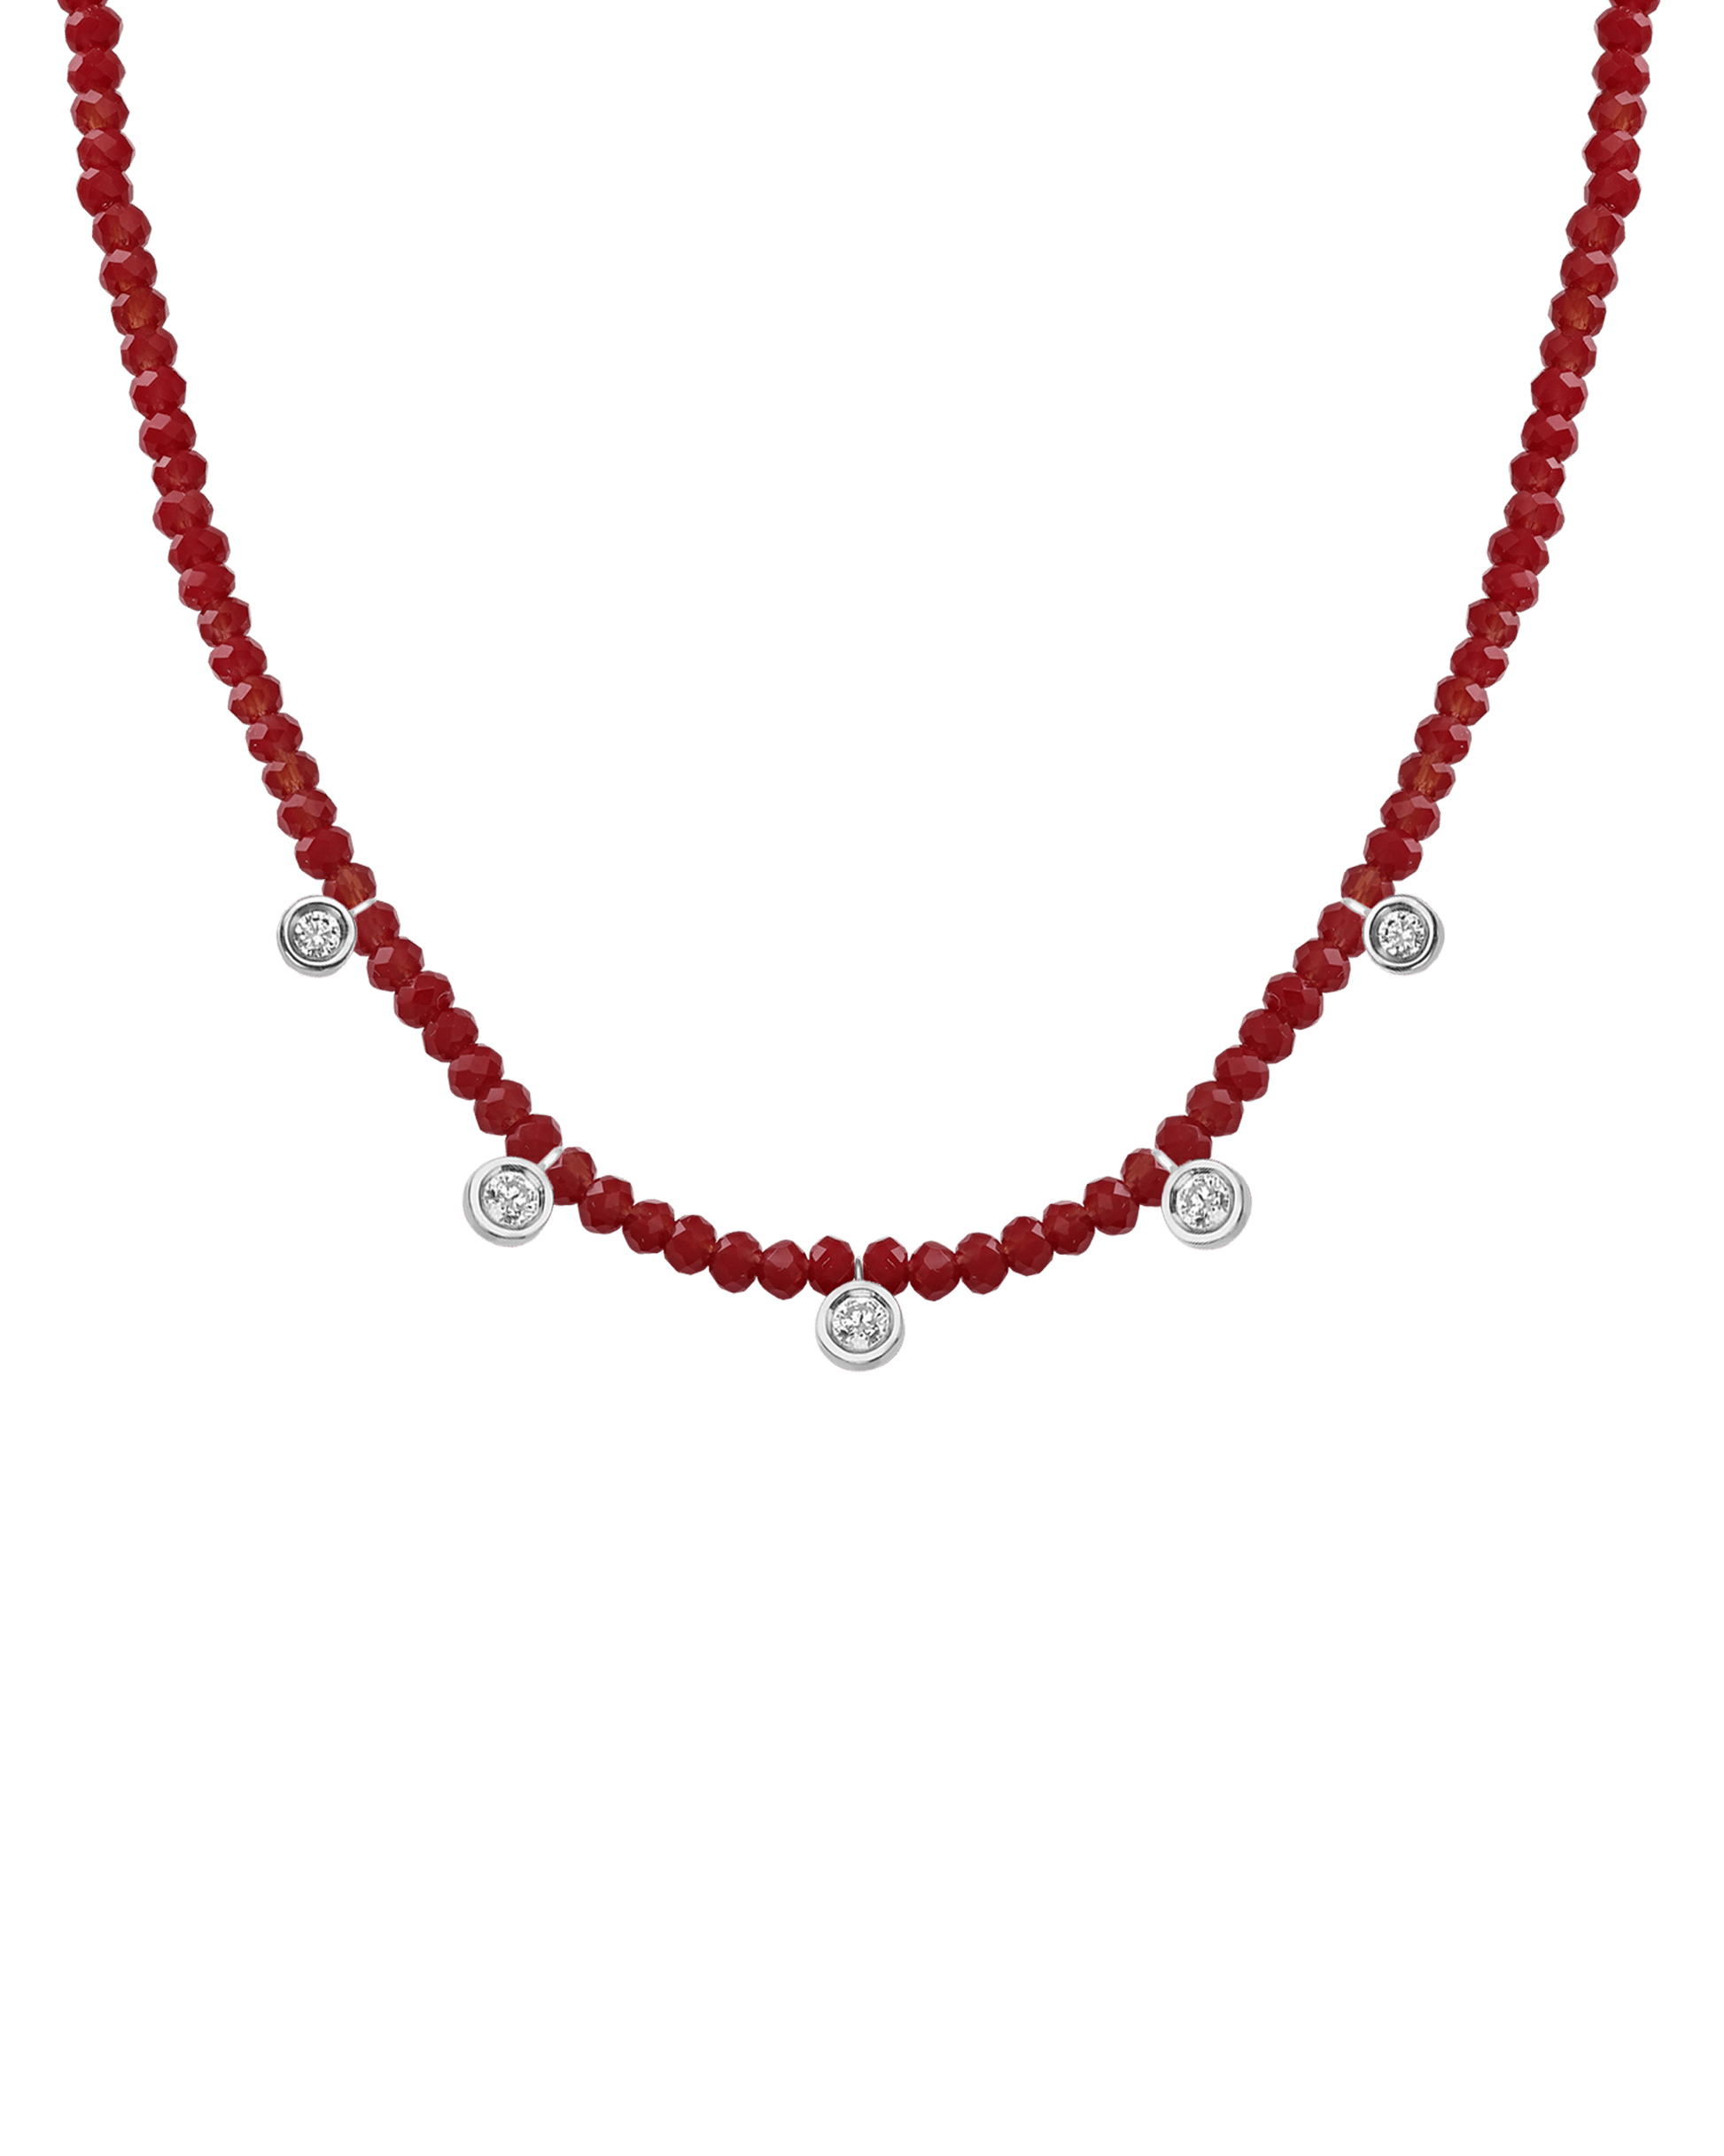 Emerald Gemstone & Five diamonds Necklace - 14K White Gold Necklaces magal-dev Natural Red Jade 14" - Collar 